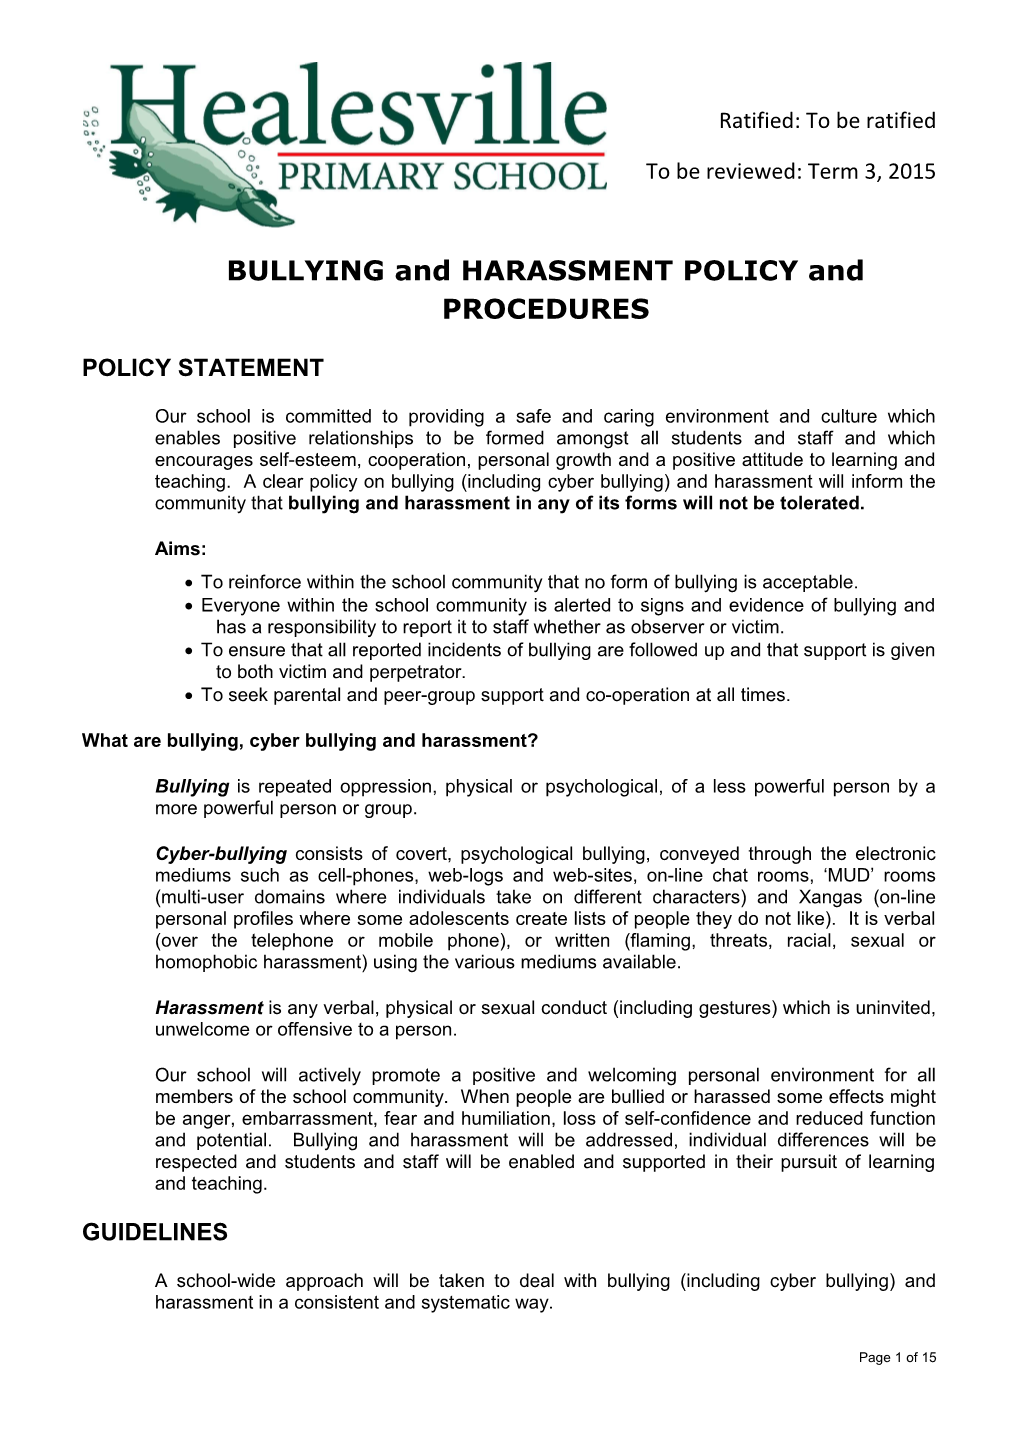 BULLYING and HARASSMENT POLICY and PROCEDURES